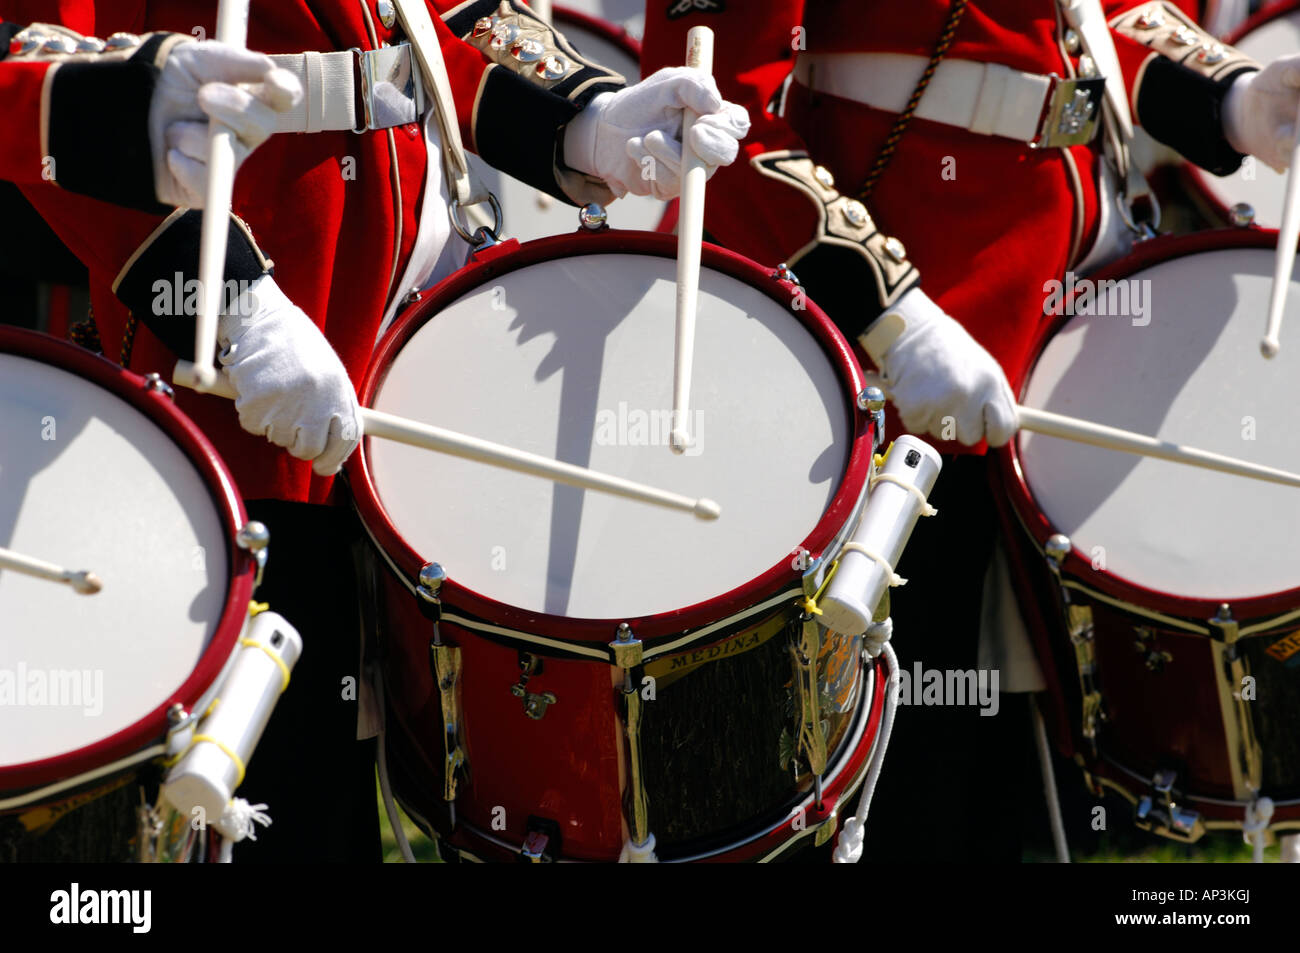 military band drummers beating drums on parade marching smartly ...